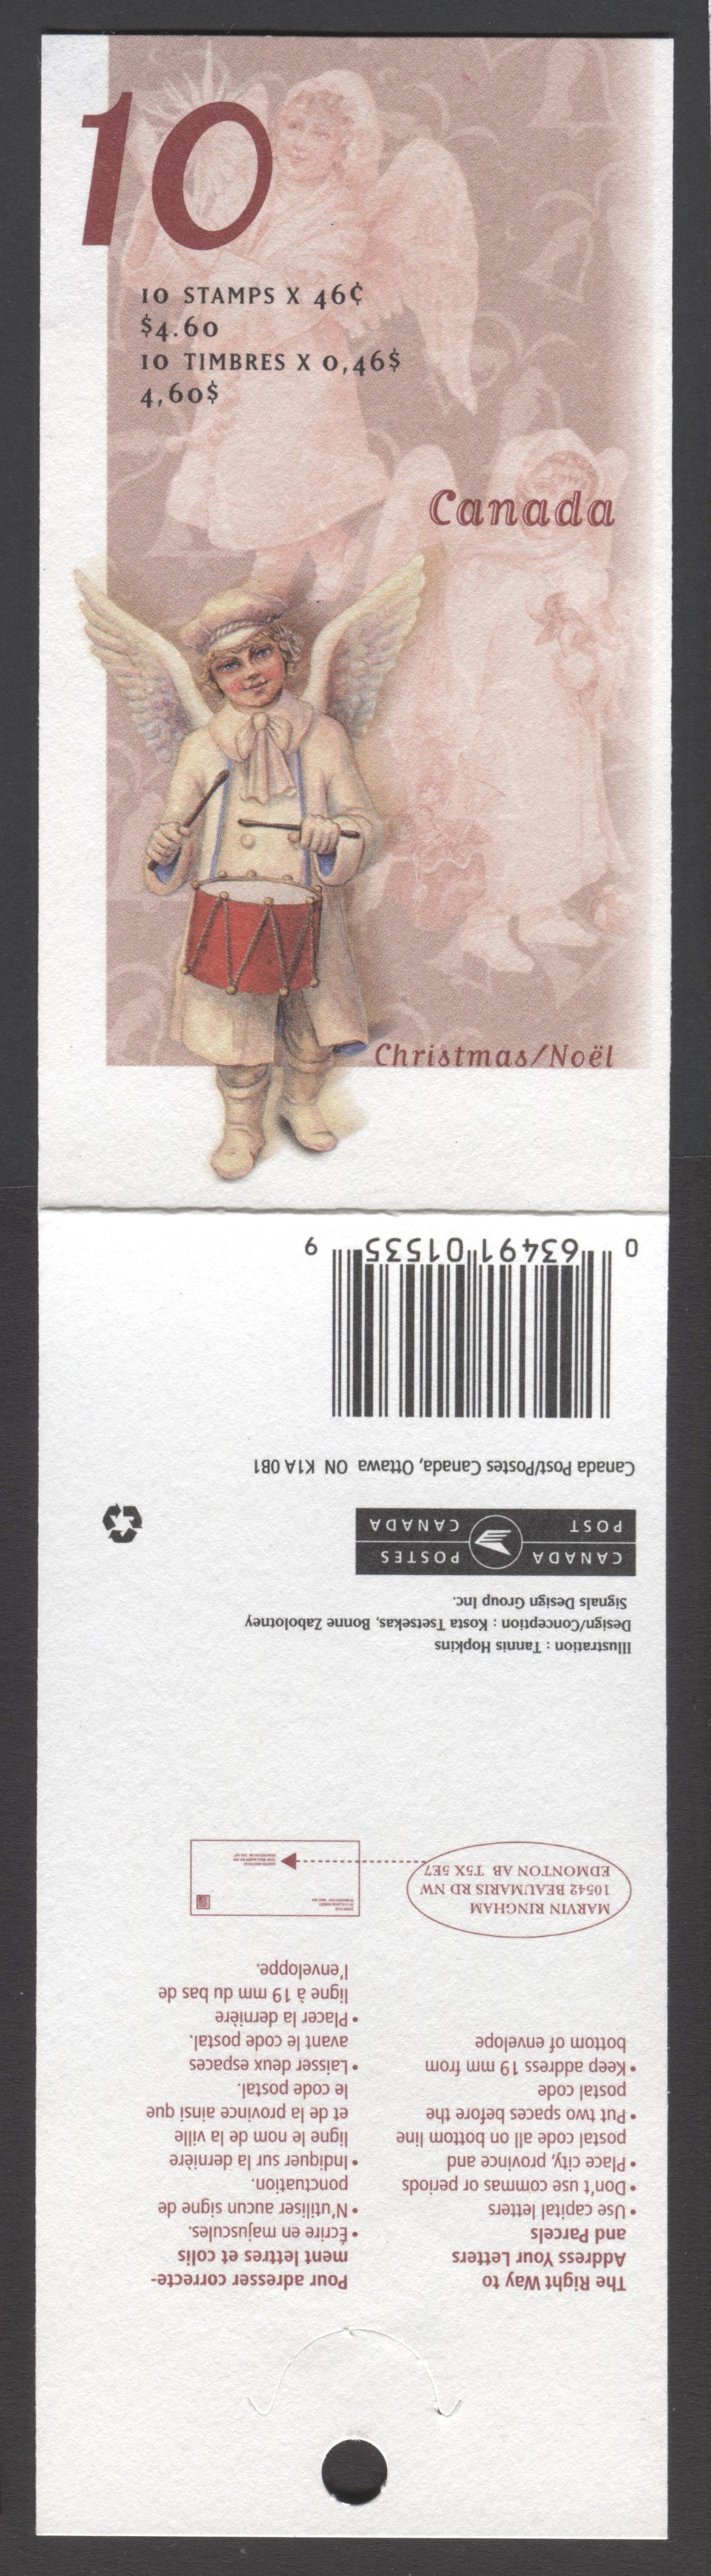 Canada #BK222a-b 1999 Christmas Issue, Complete $4.60 Booklet, Tullis Russell Coatings Paper, Dead Paper, 4 mm GT-4 Tagging